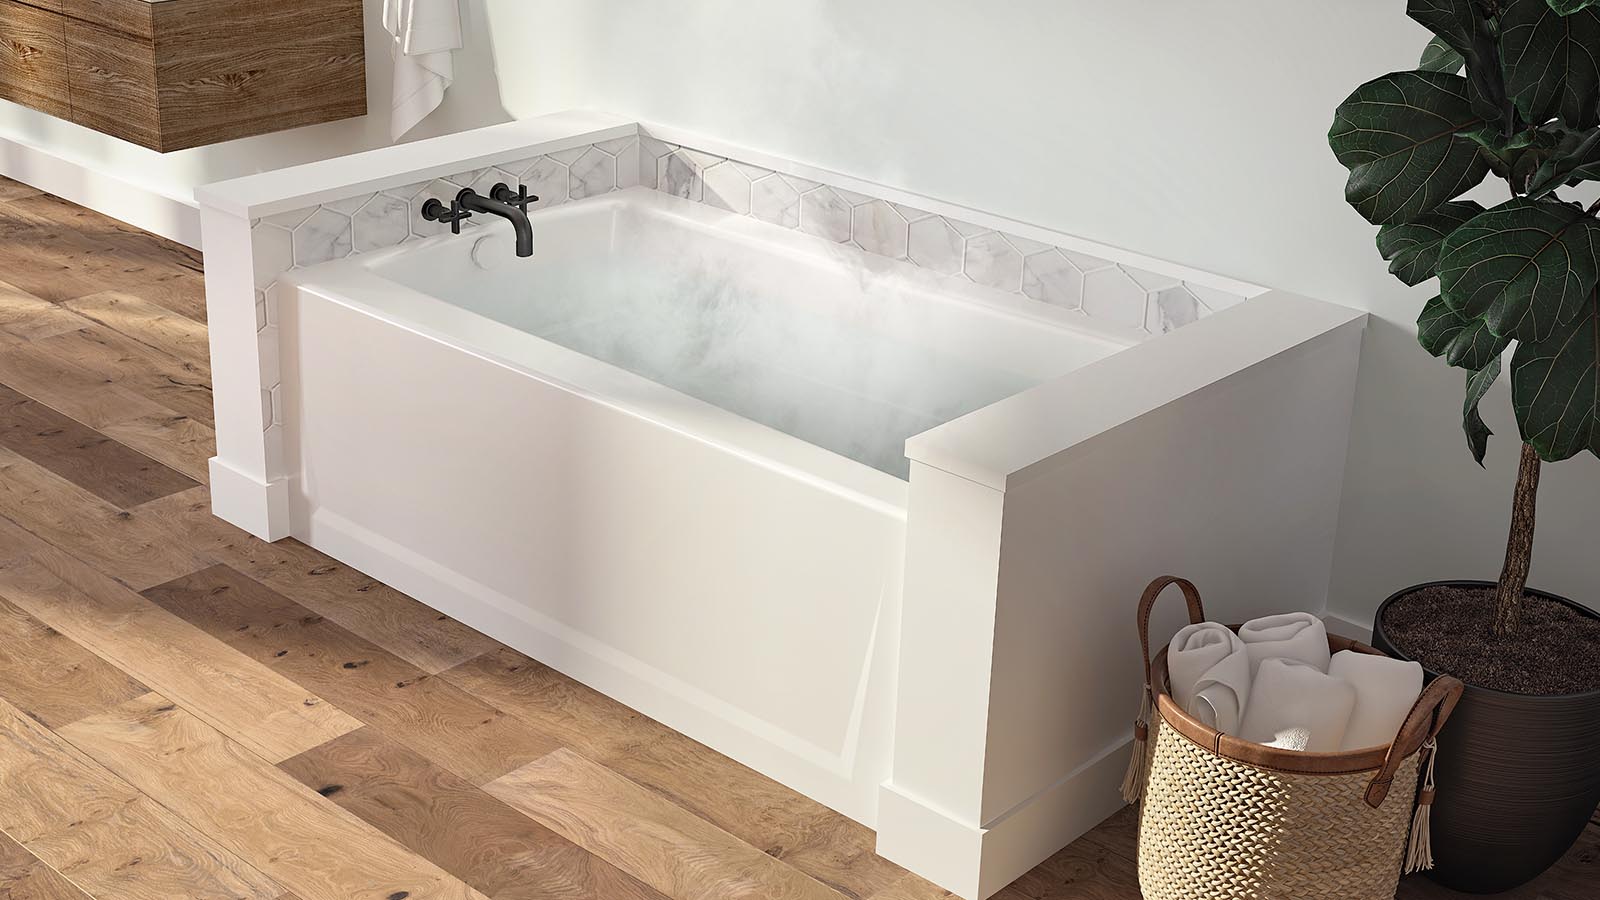 Video of a hot soaking therapy tub.